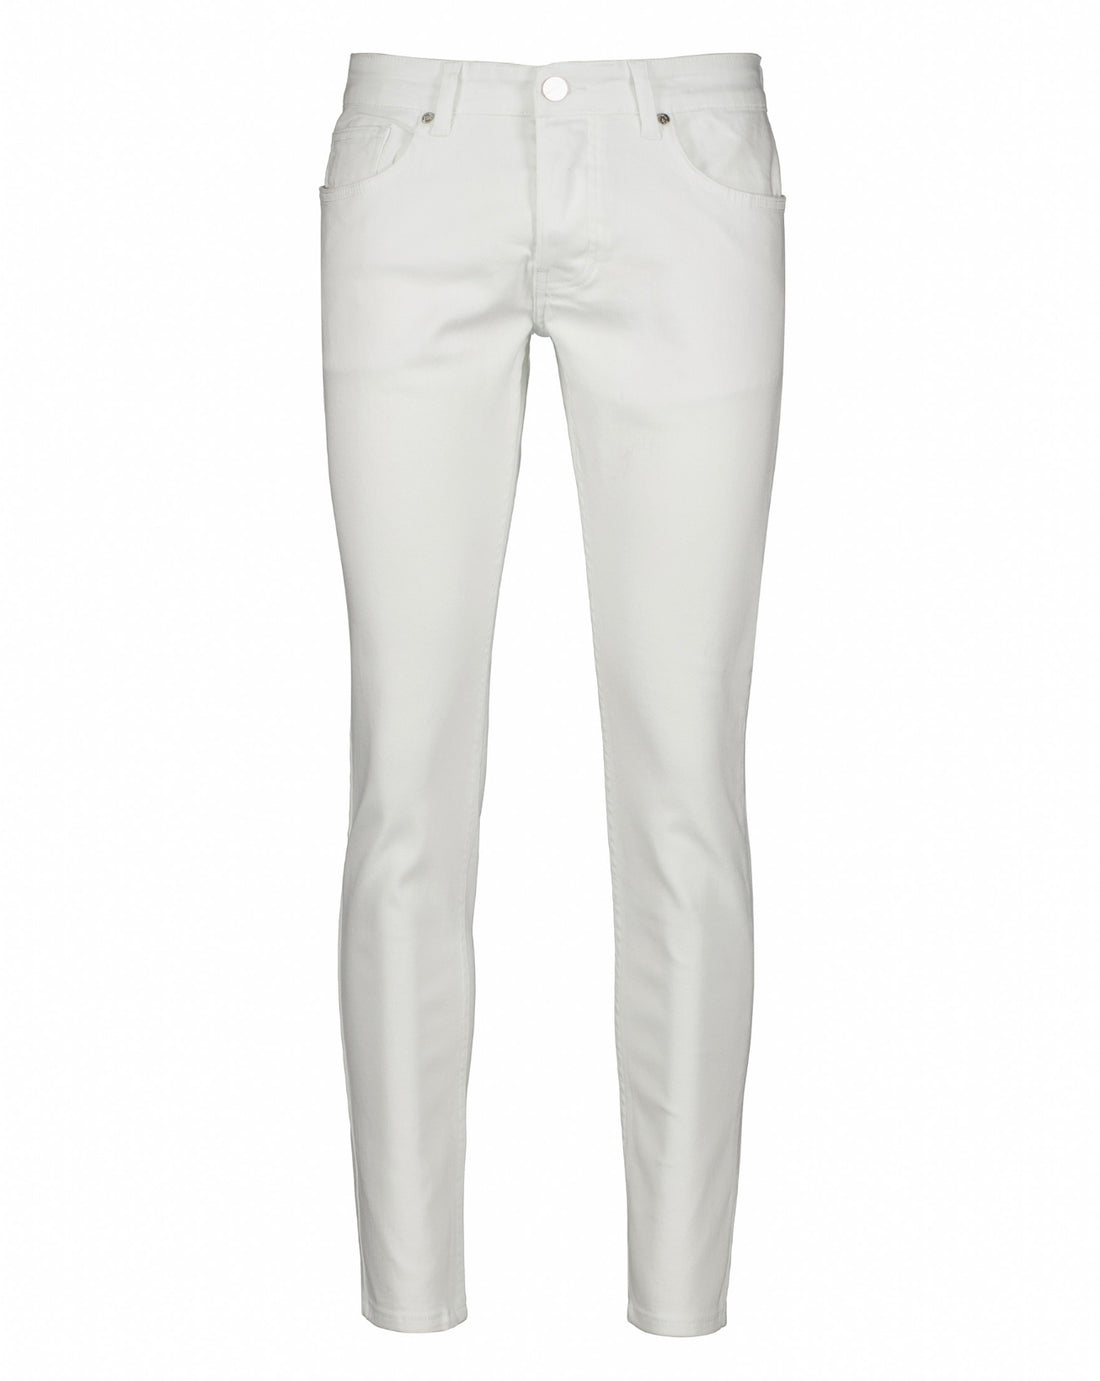 The Lorenzo White Jeans - Jeans by Urbbana